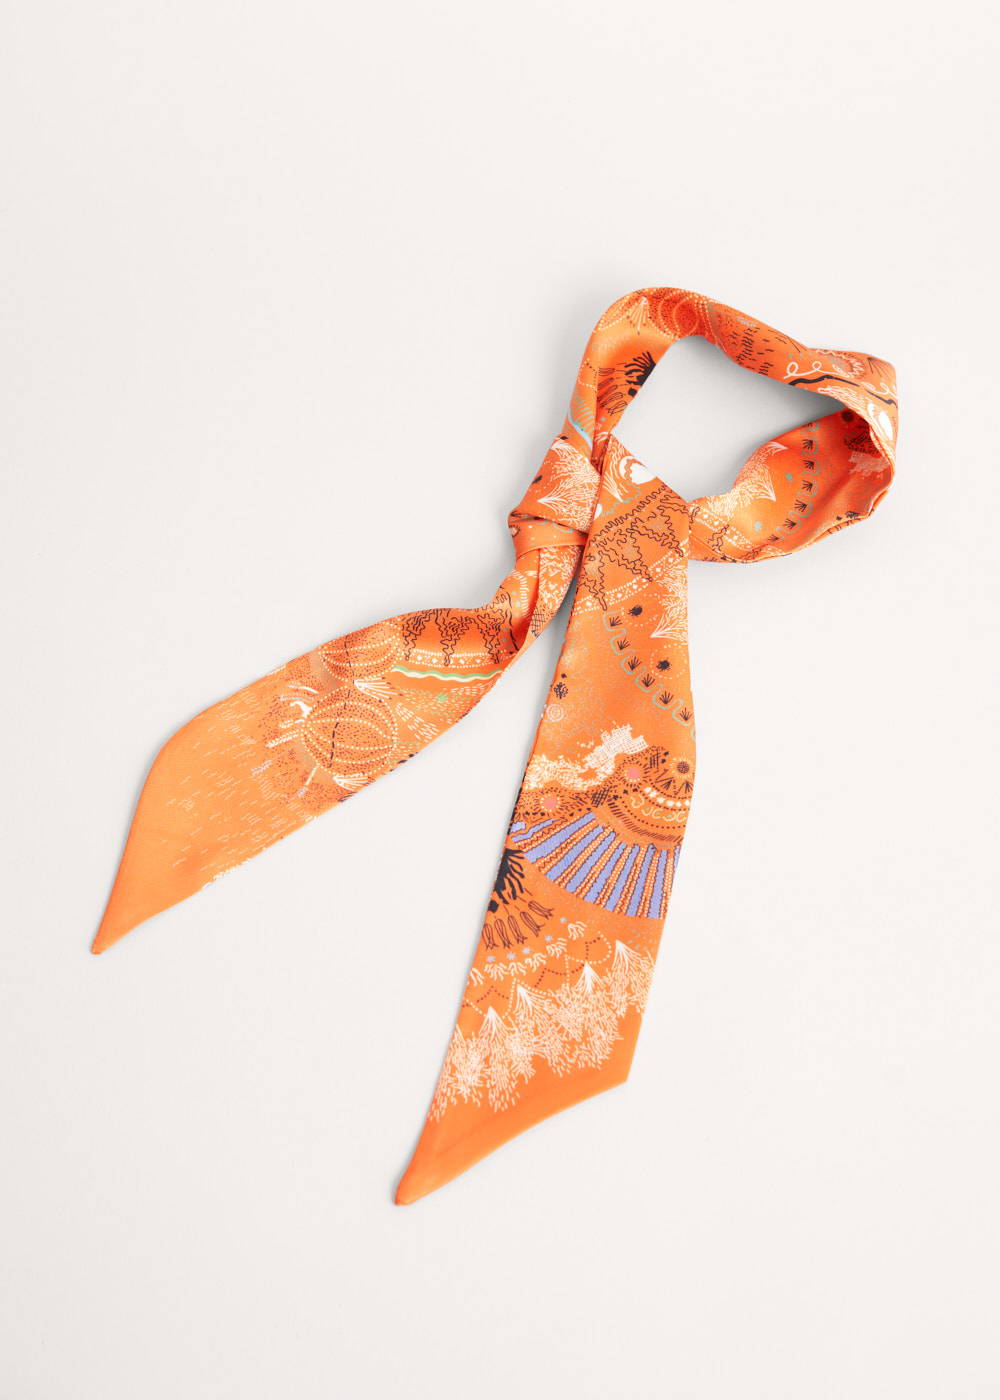 An orange satin neck scarf with a white and blue pattern